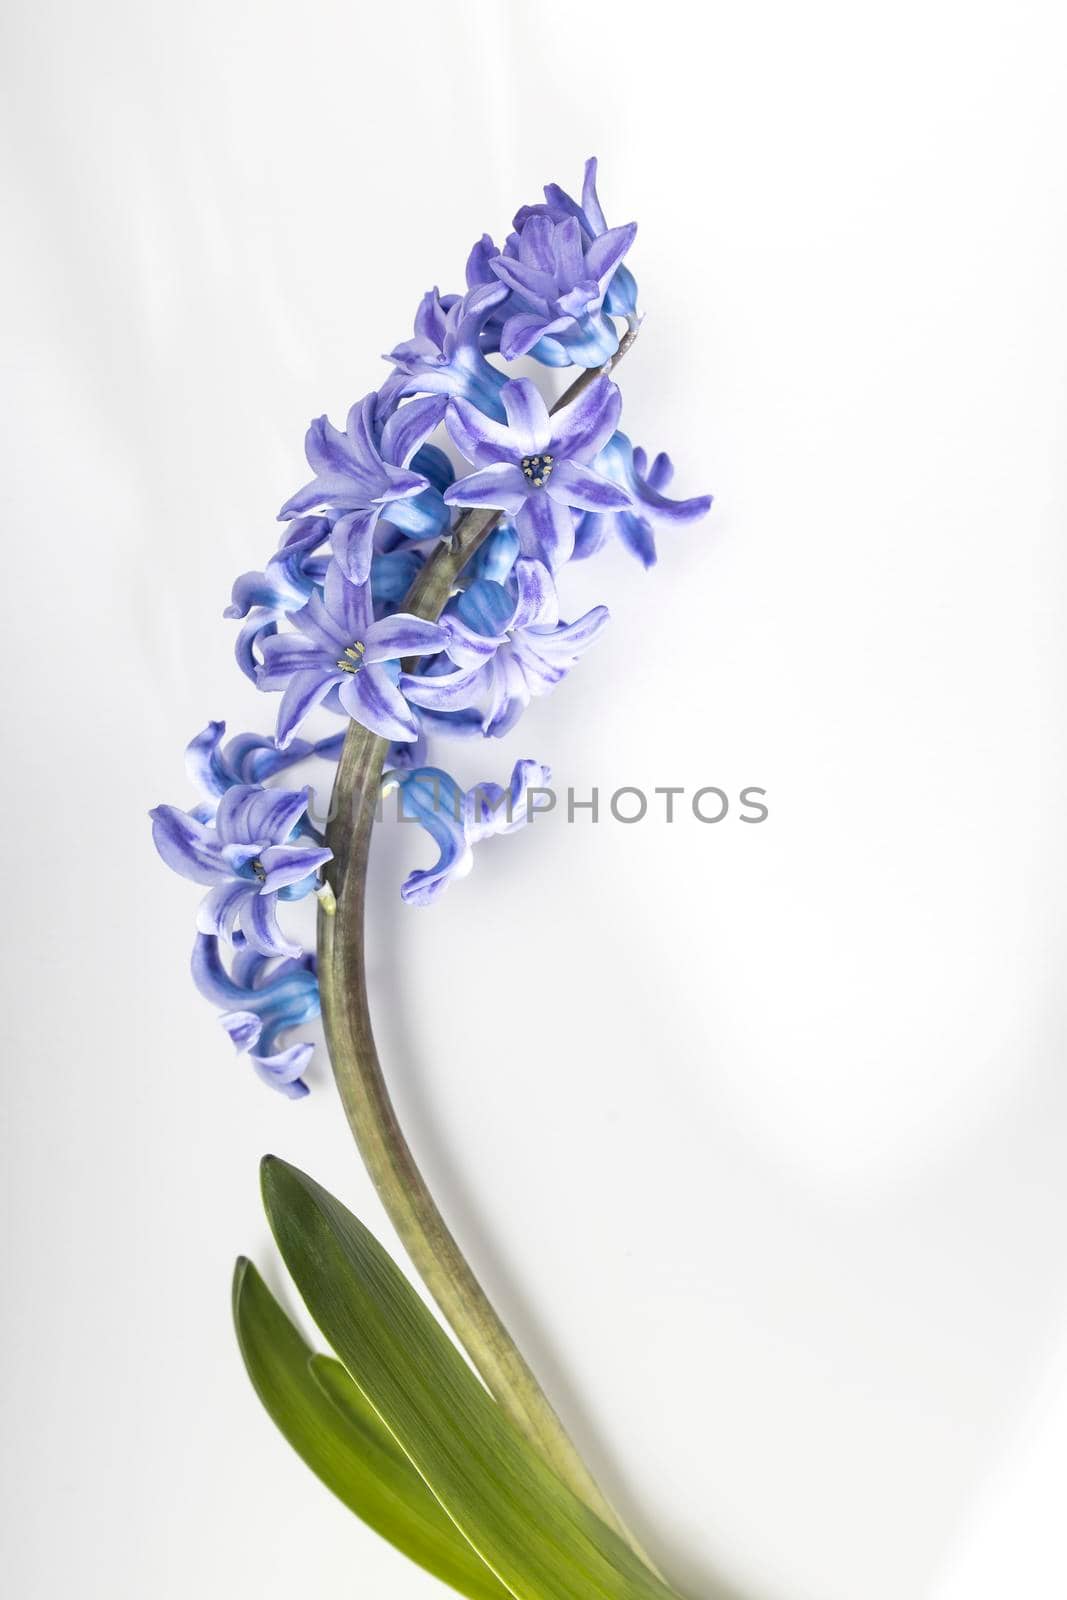 hyacinth plant with blue flowers, bulbs and roots on a white background. by elenarostunova